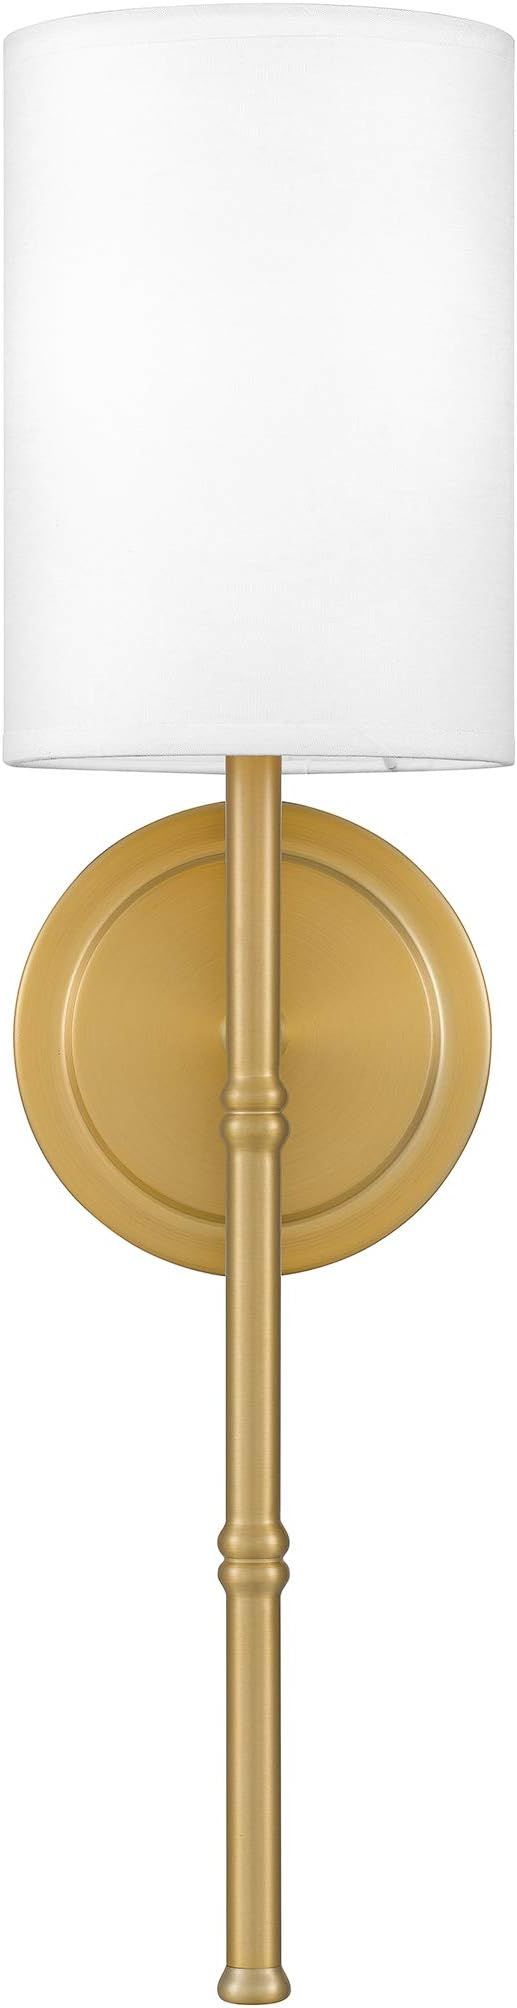 Ashley Harbour DS19298A Dorsett Wall Sconce, AB - Aged Brass | Amazon (US)